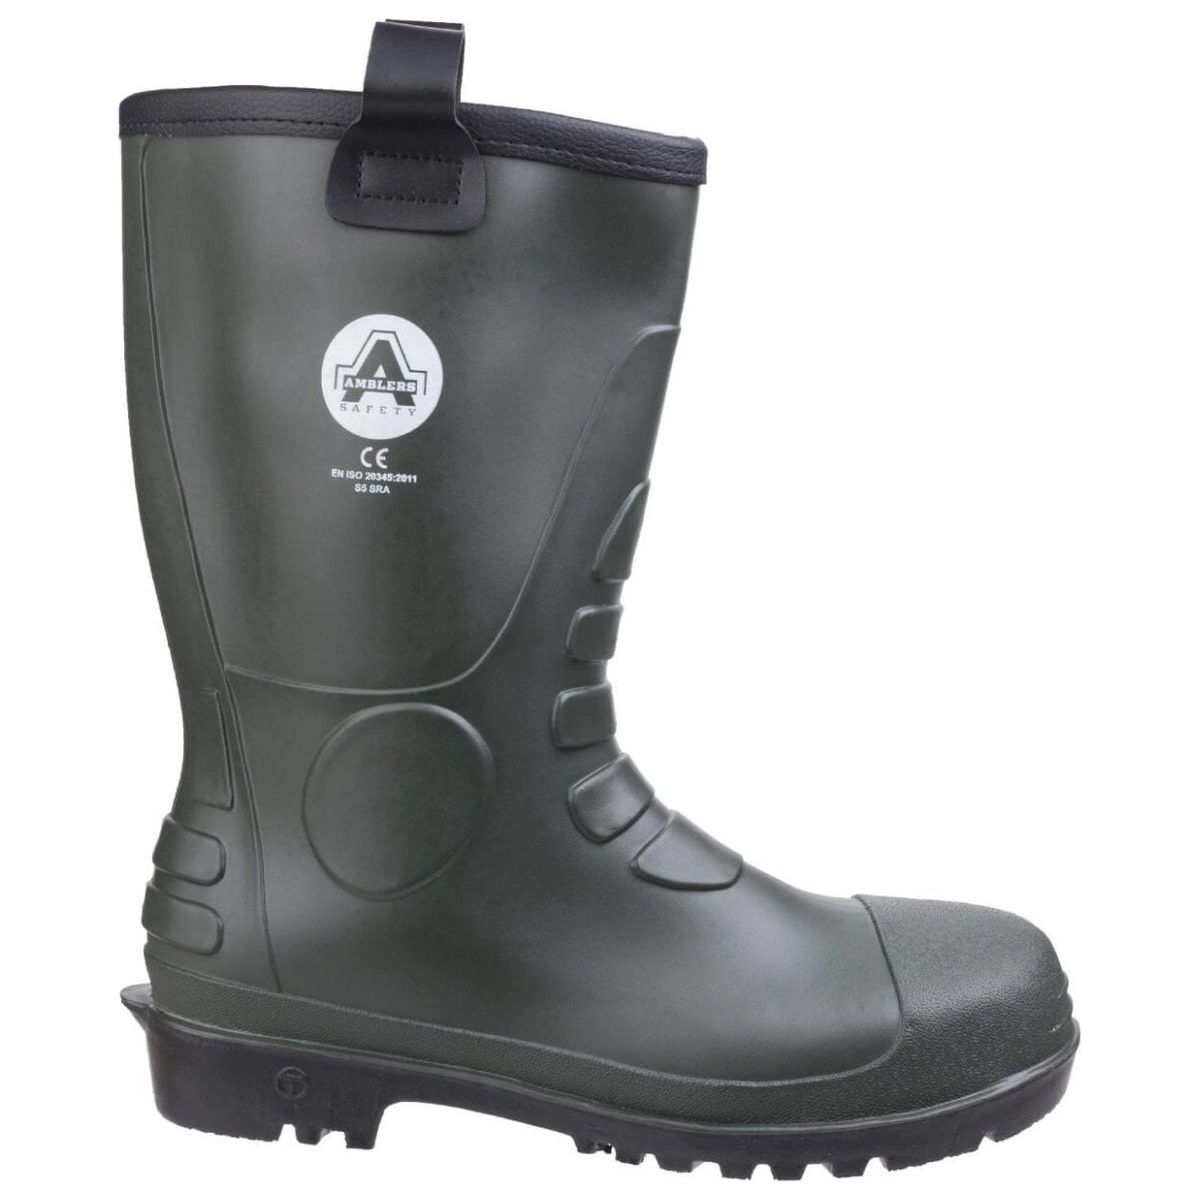 Amblers Fs97 Pvc Safety Rigger Boots Mens - workweargurus.com